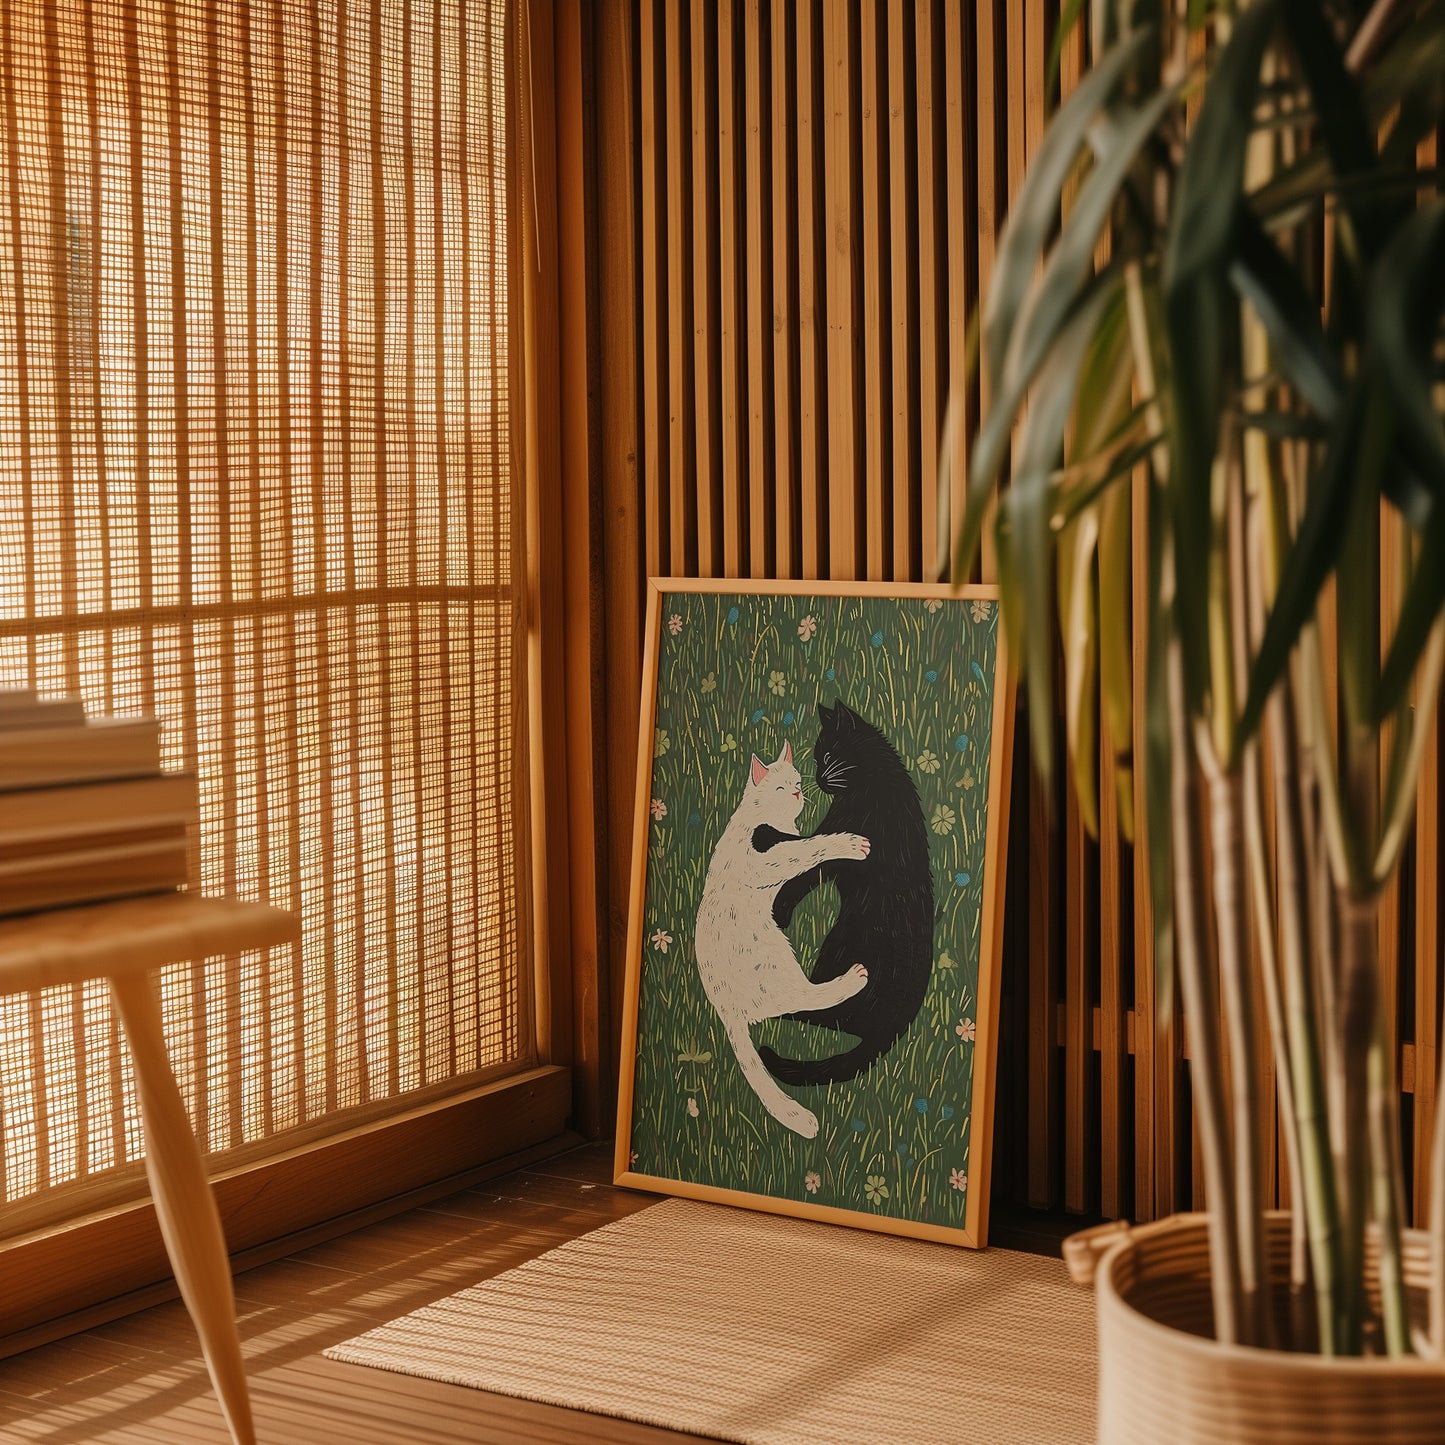 A painting of a white and black cat on a green background placed in a cozy room with plants and a bamboo shade.